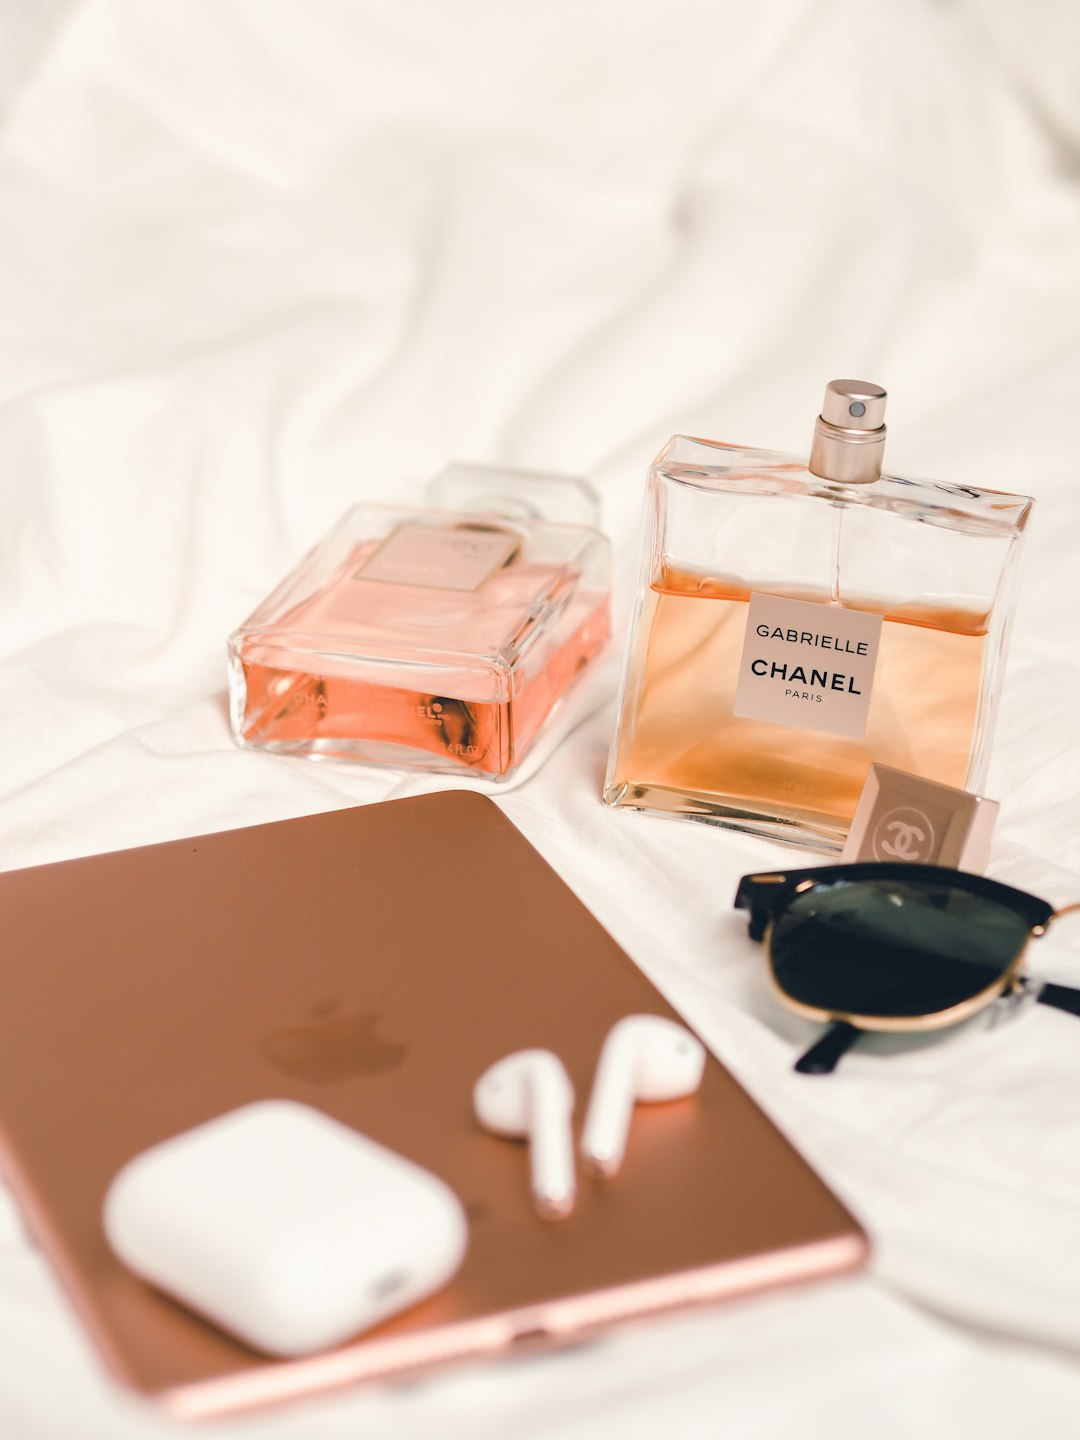 white and black sunglasses beside white earbuds and brown and white perfume bottle